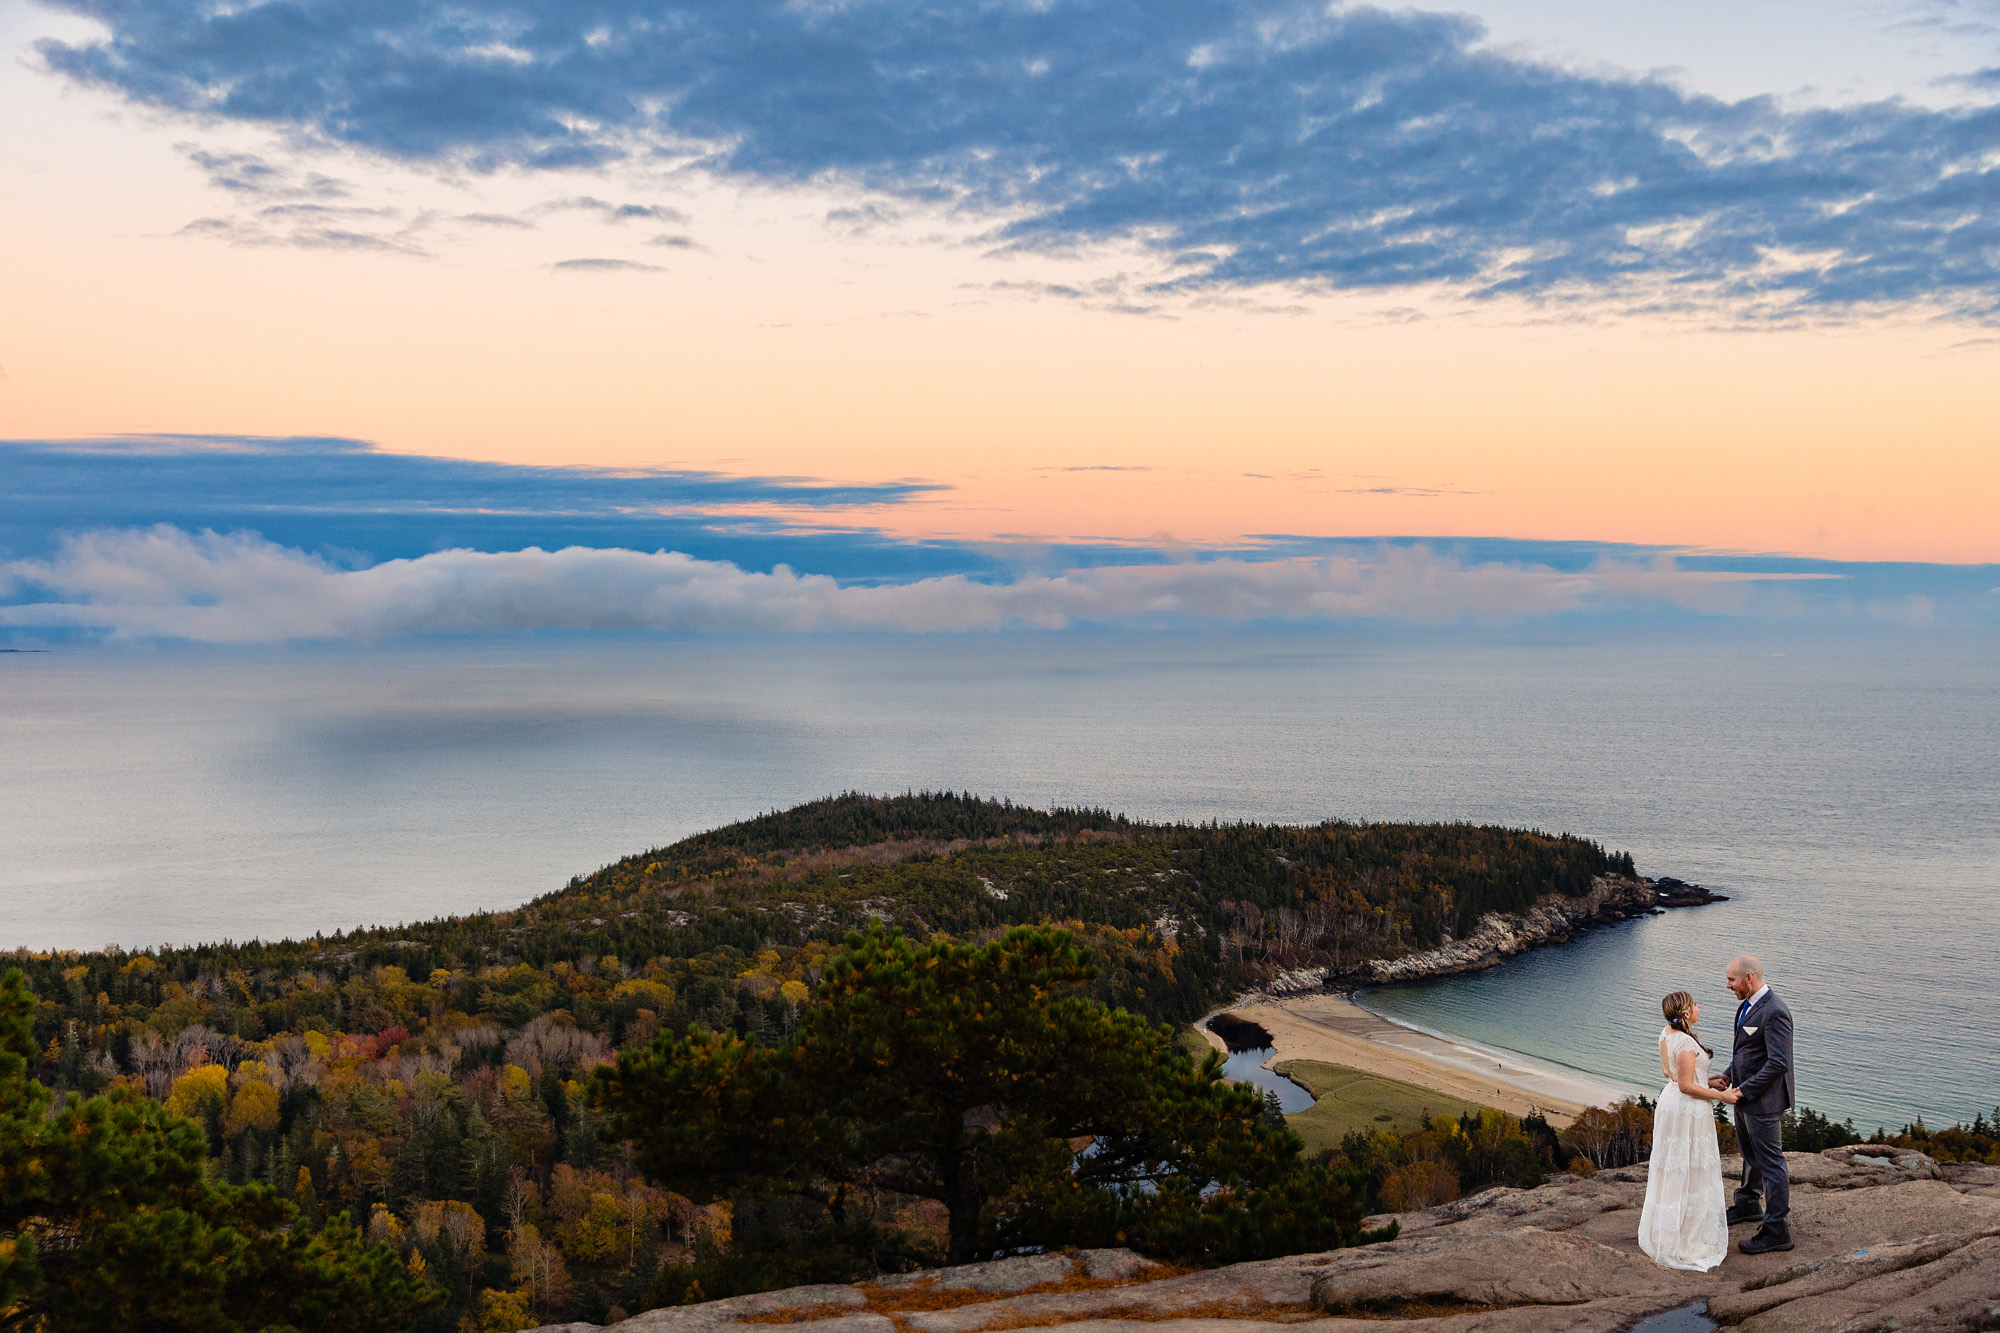 A stunning wedding portrait on top of a mountain in Acadia National Park